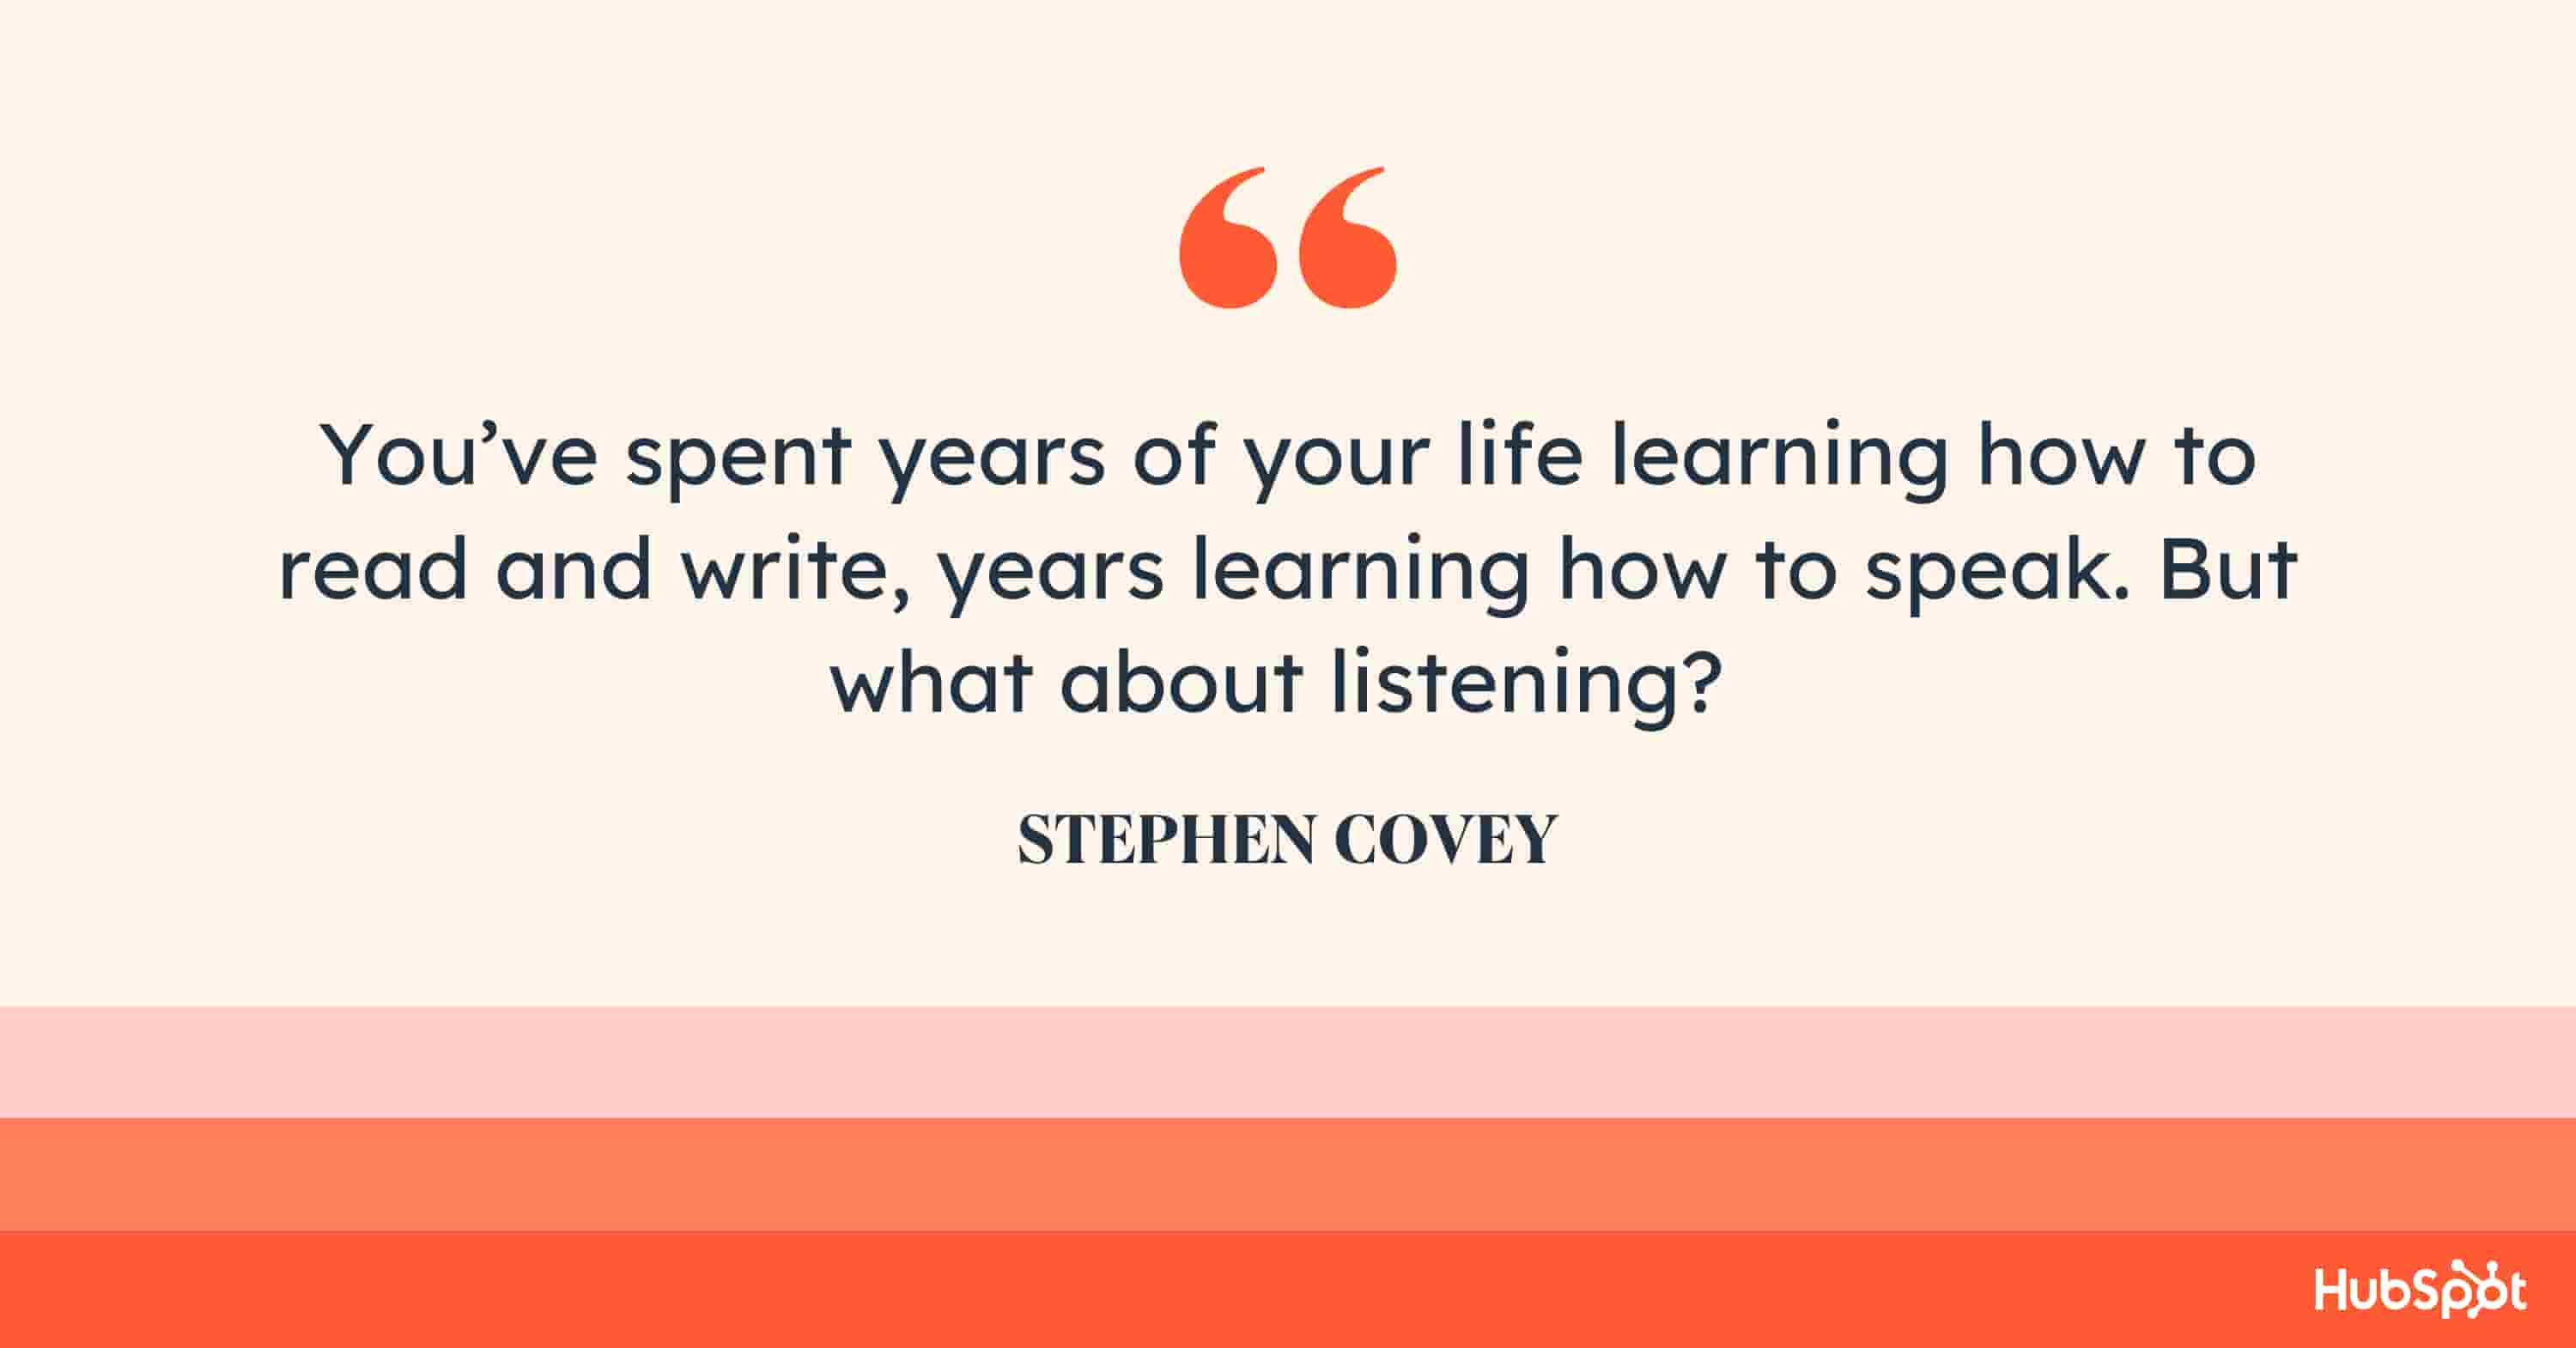 7 habits of highly effective people quote, You’ve spent years of your life learning how to read and write, years learning how to speak. But what about listening?